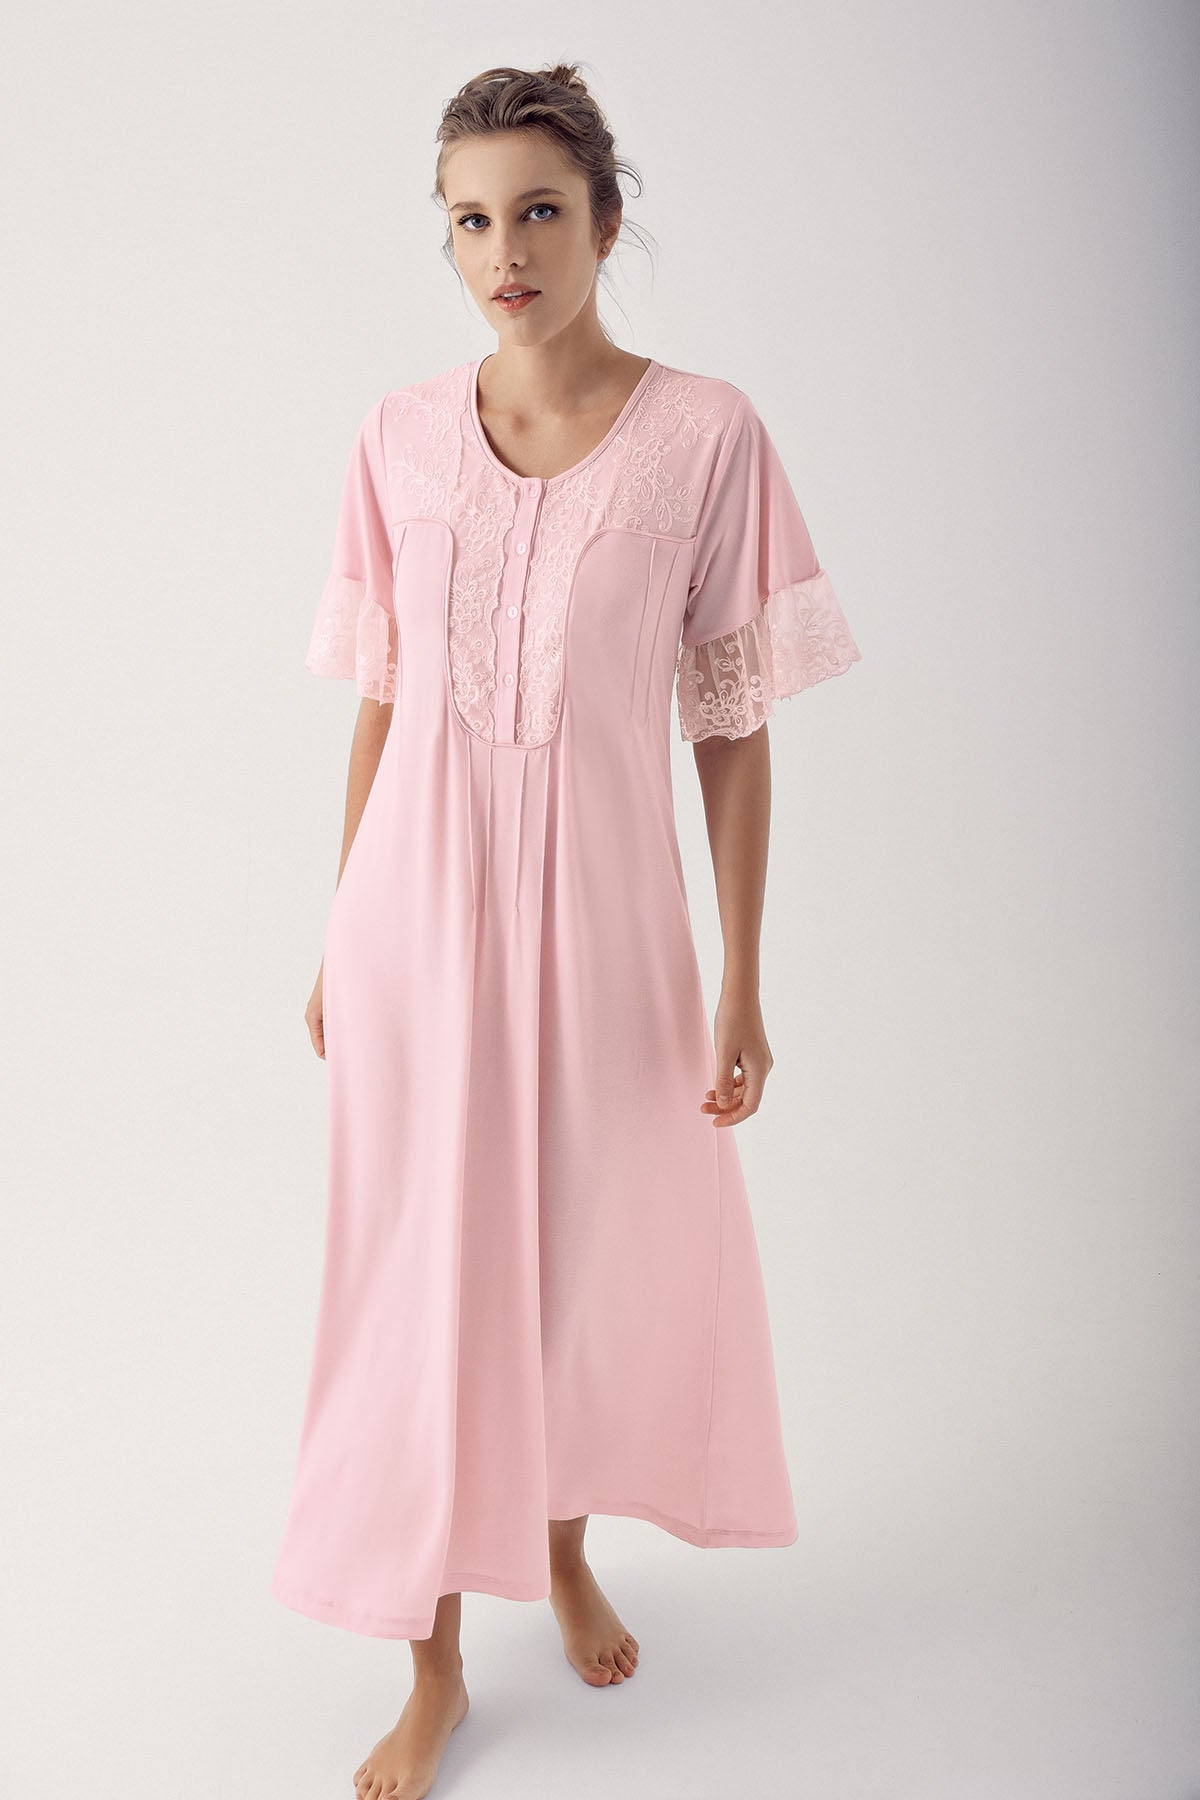 Shopymommy 14105 Collar And Sleeve Lace Maternity & Nursing Nightgown Powder